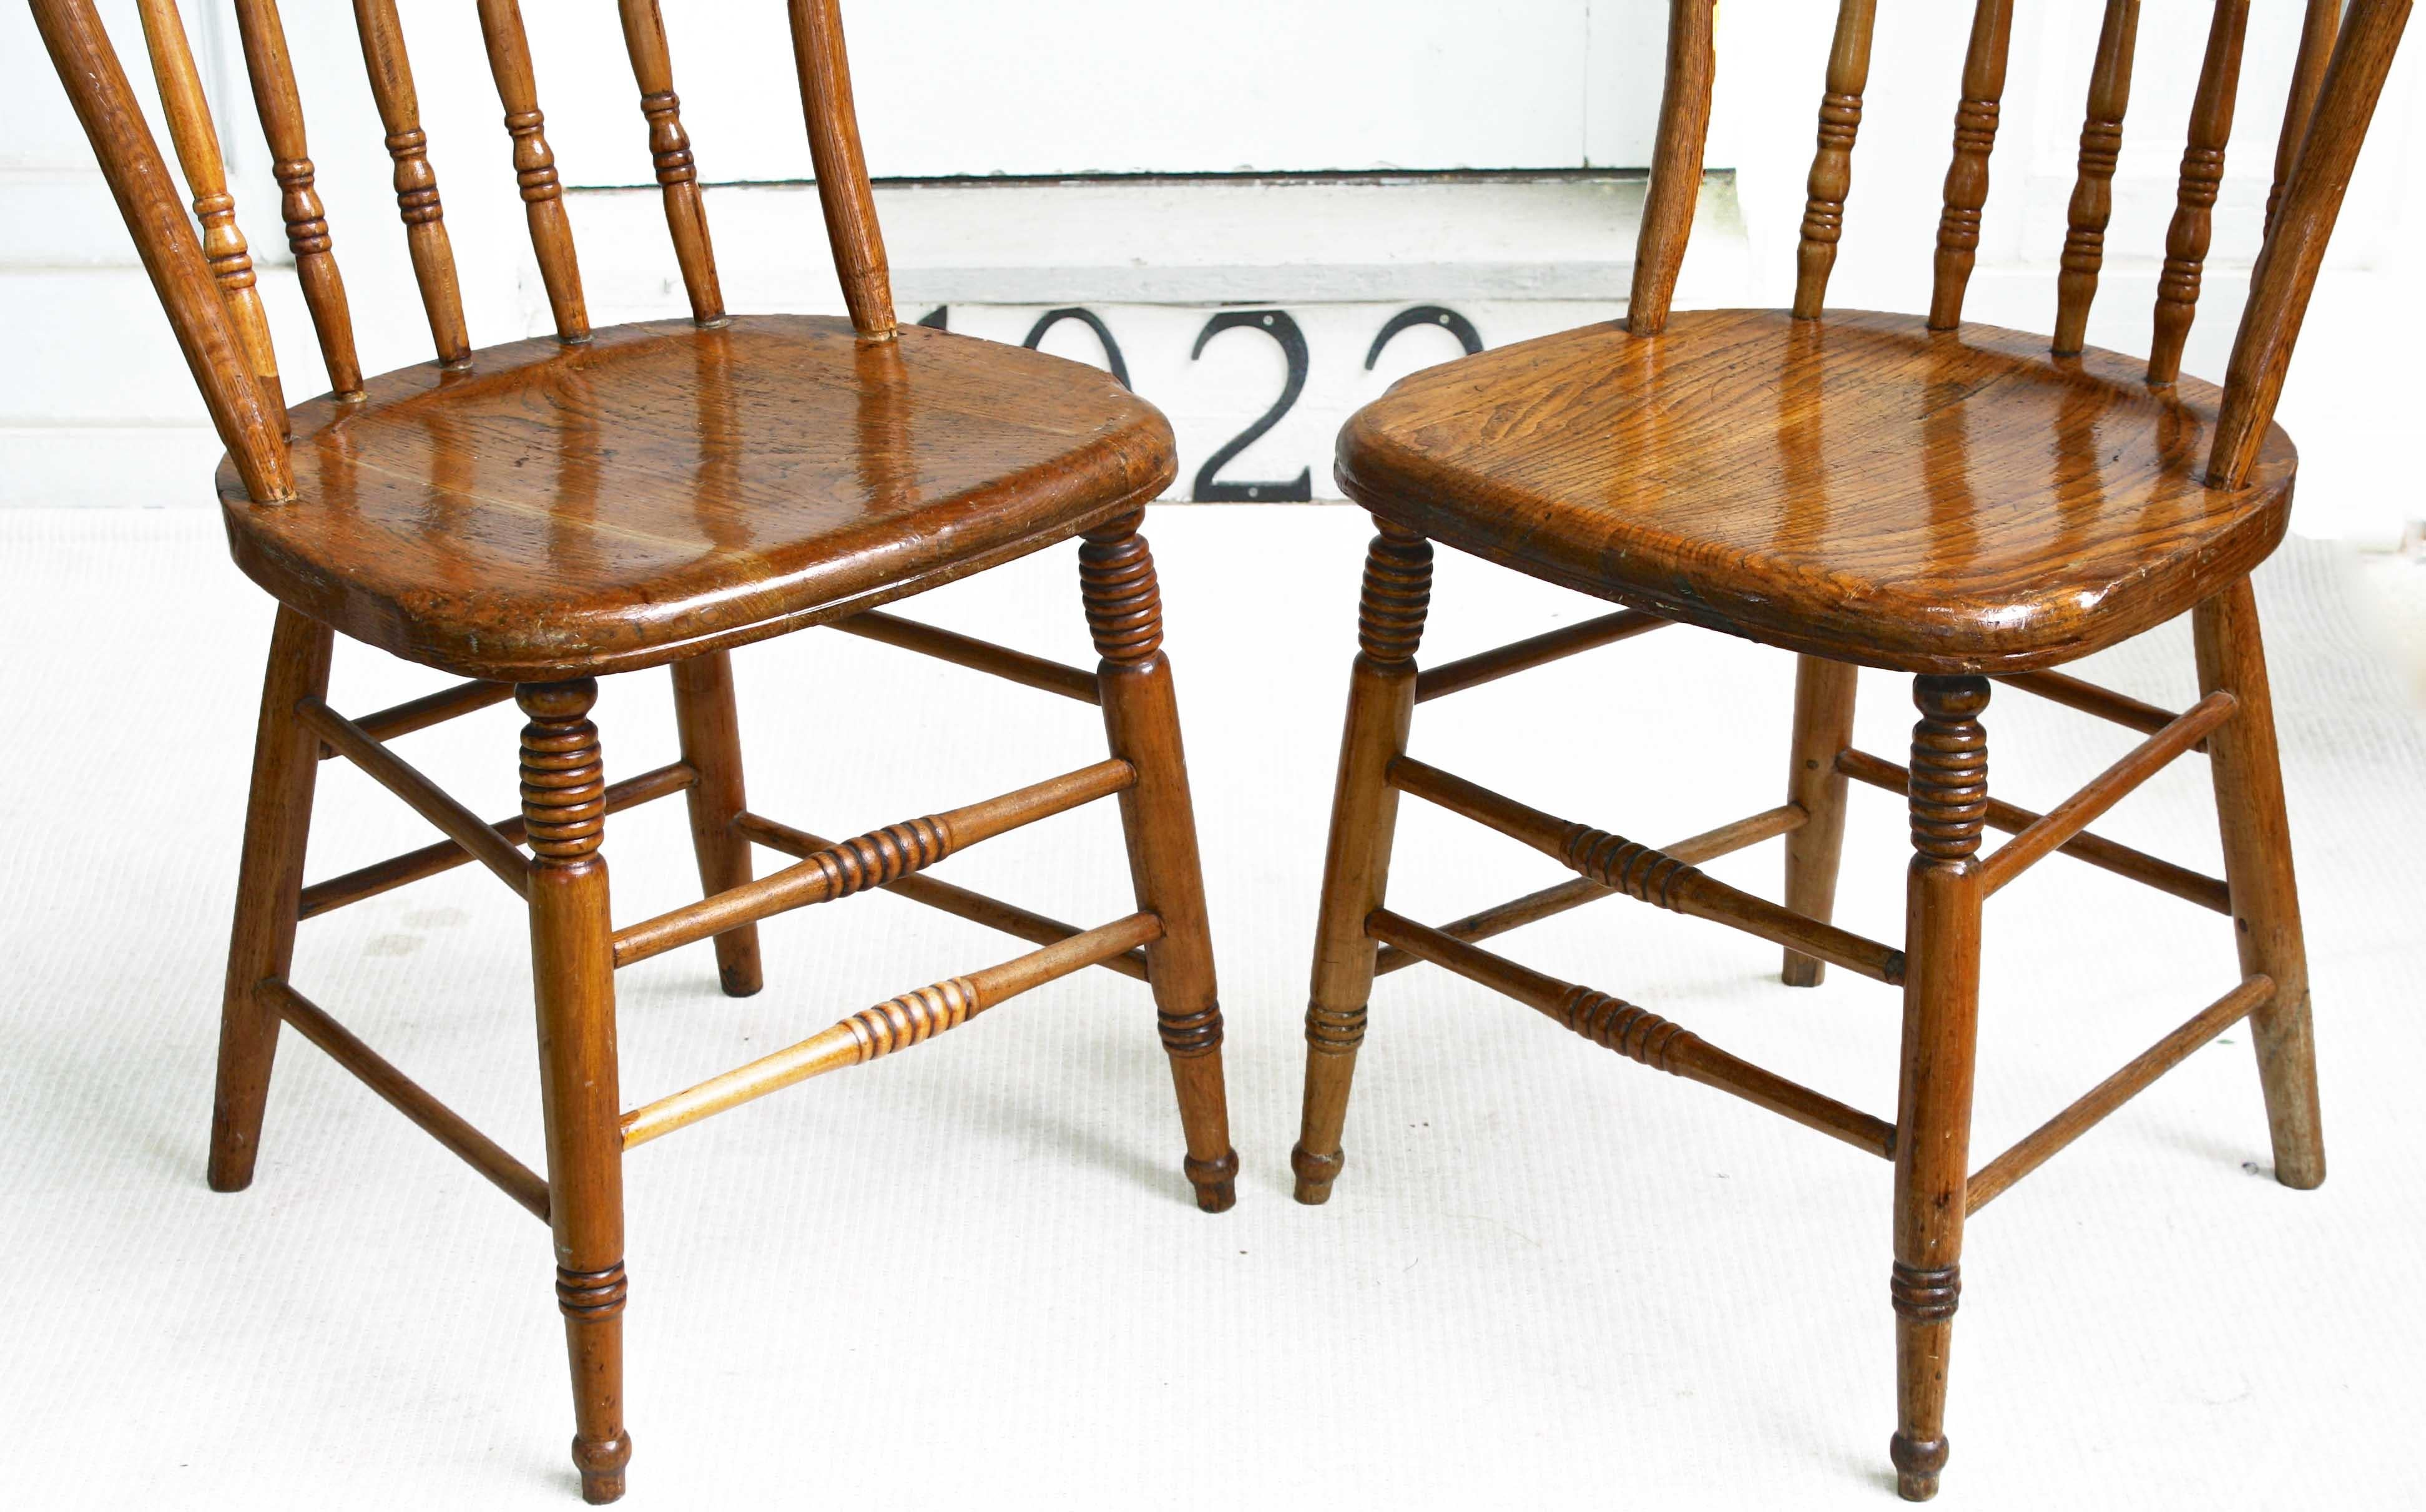 19th Century TEN Connecticut Hoop Back Windsor Chairs For Sale